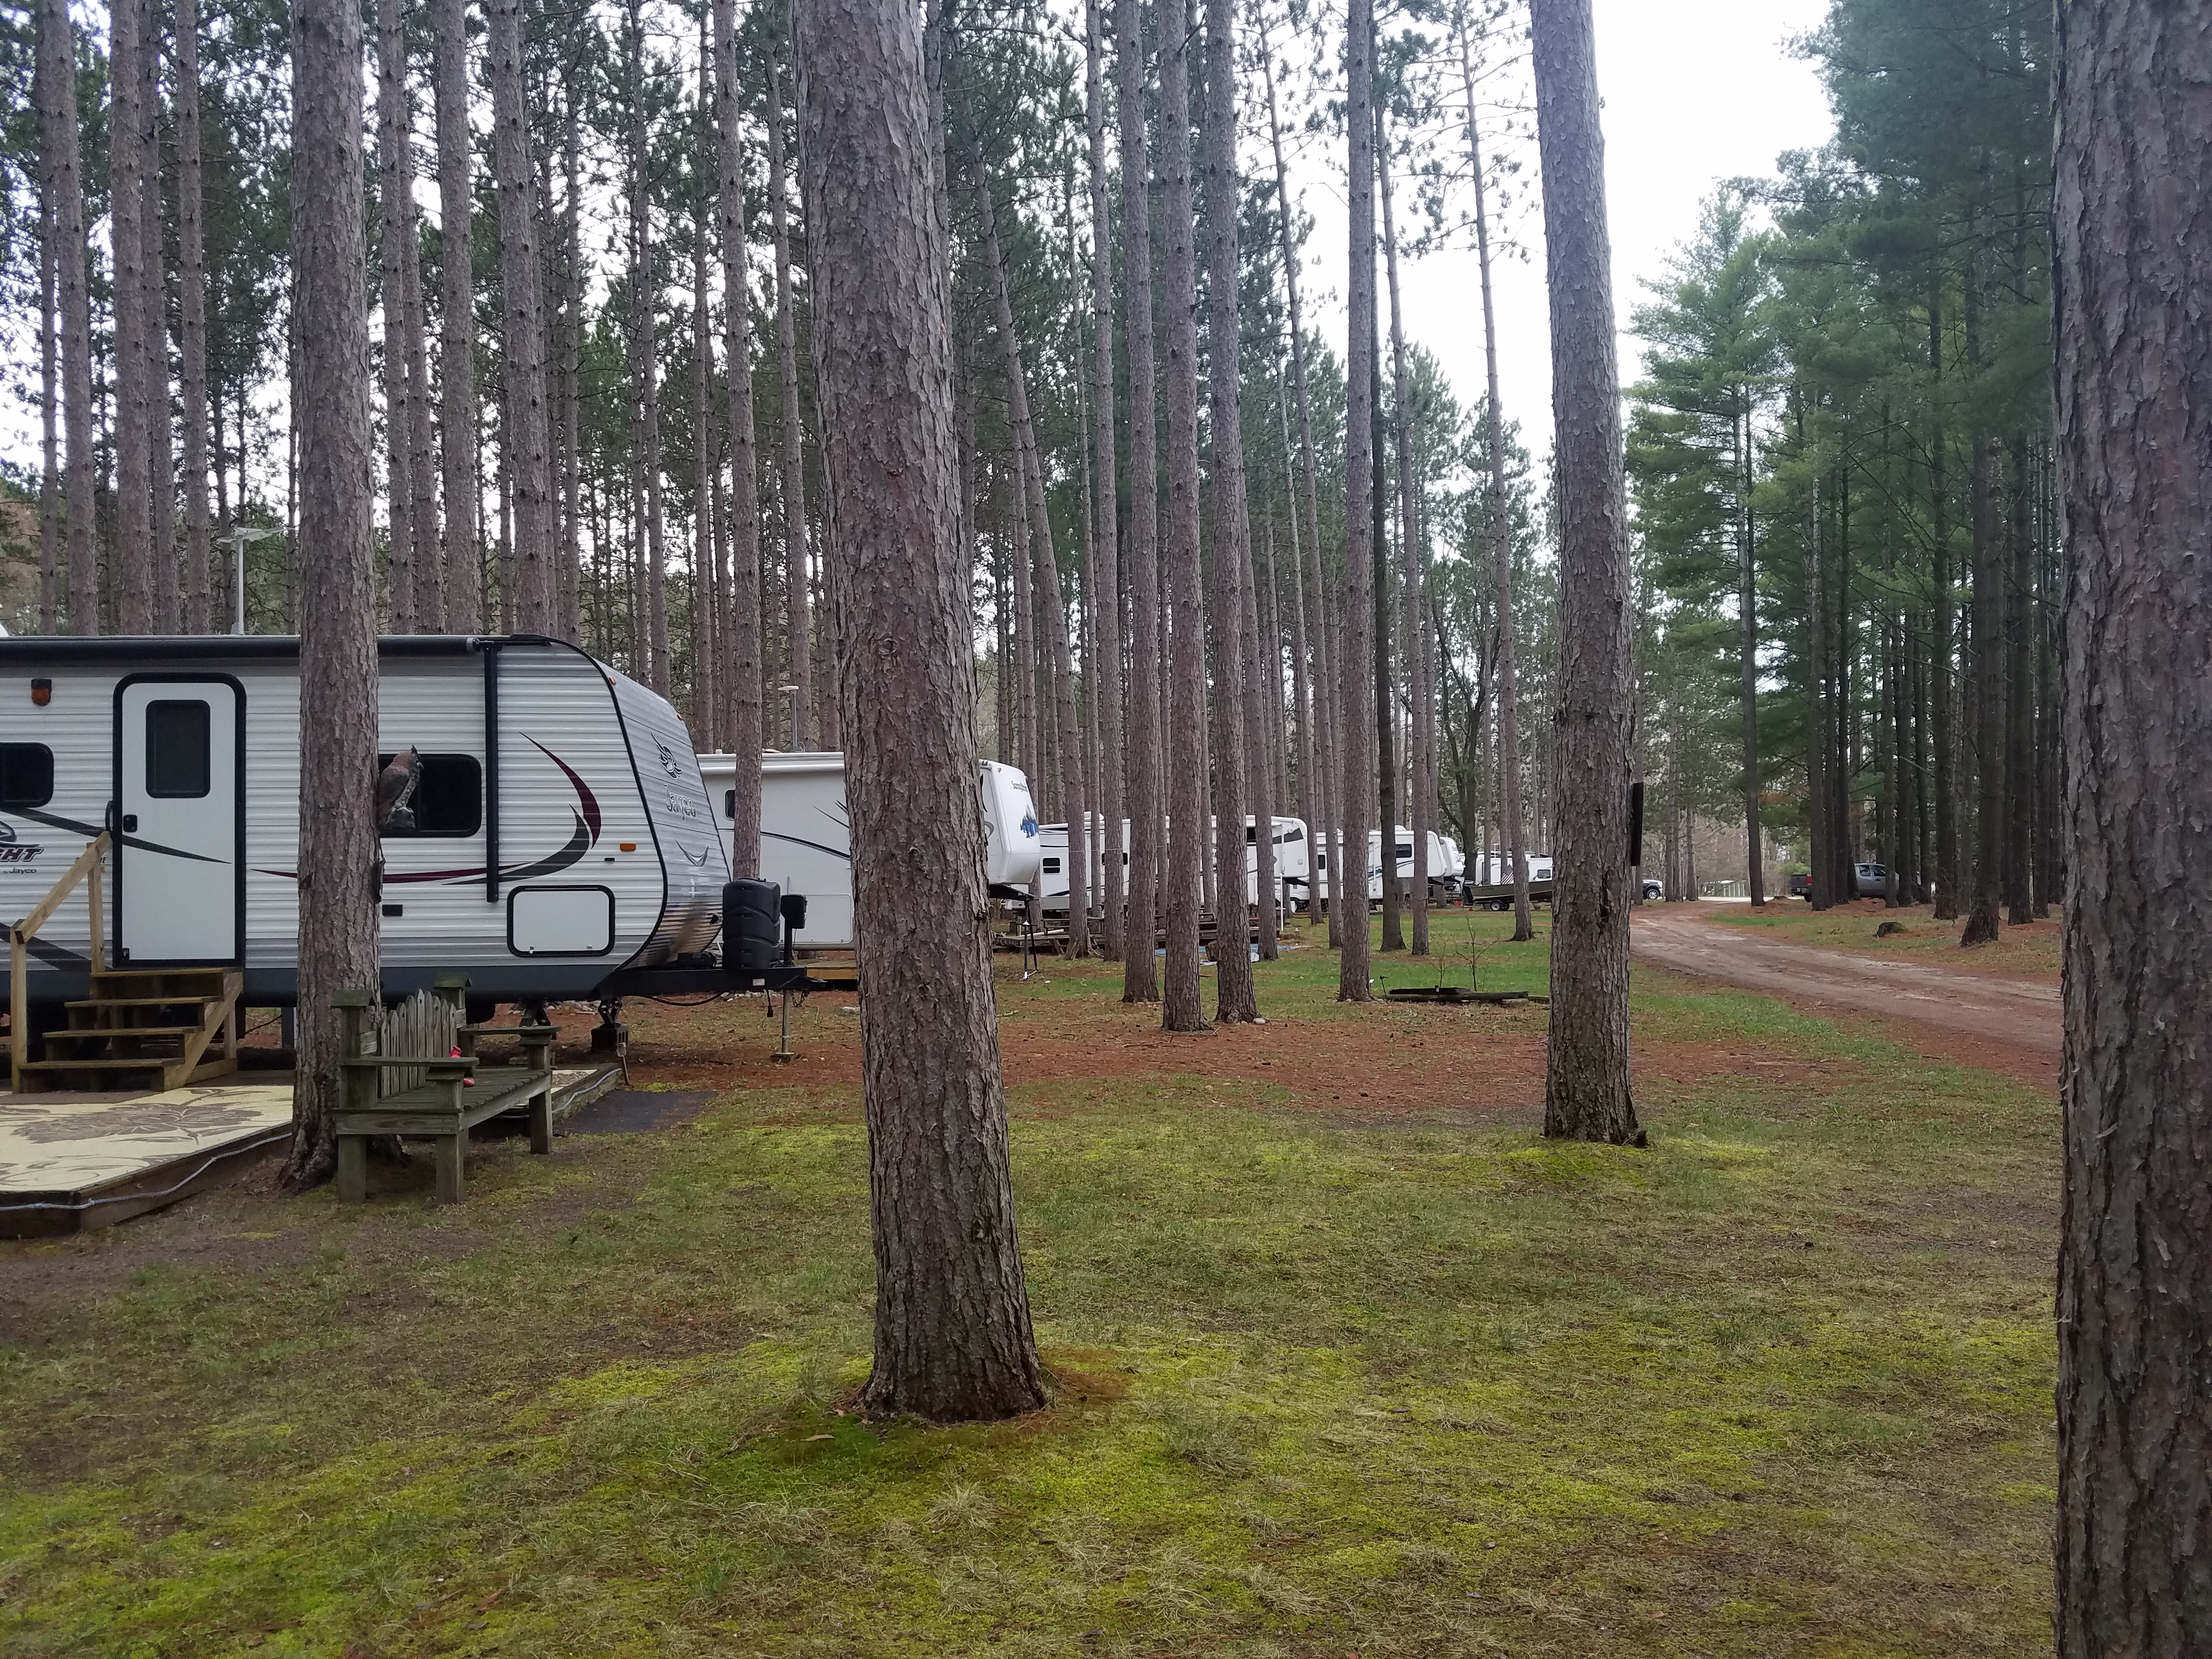 Michigan Association of Recreation Vehicles and Campgrounds, Tuesday, June 9, 2020, Press release picture